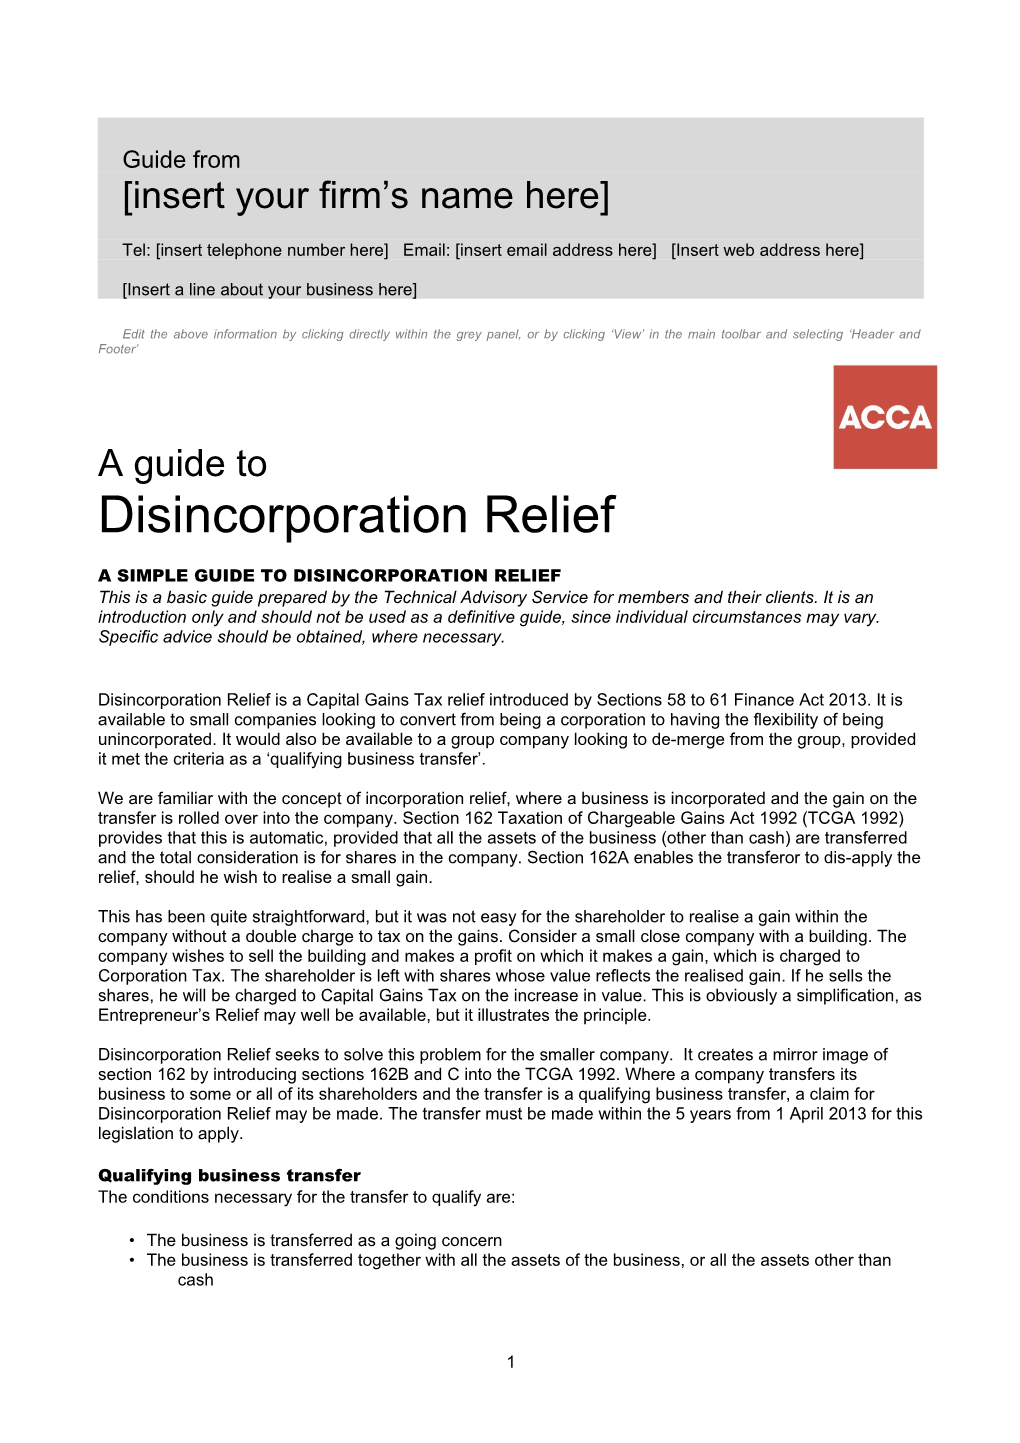 A Simple Guide to Disincorporation Relief